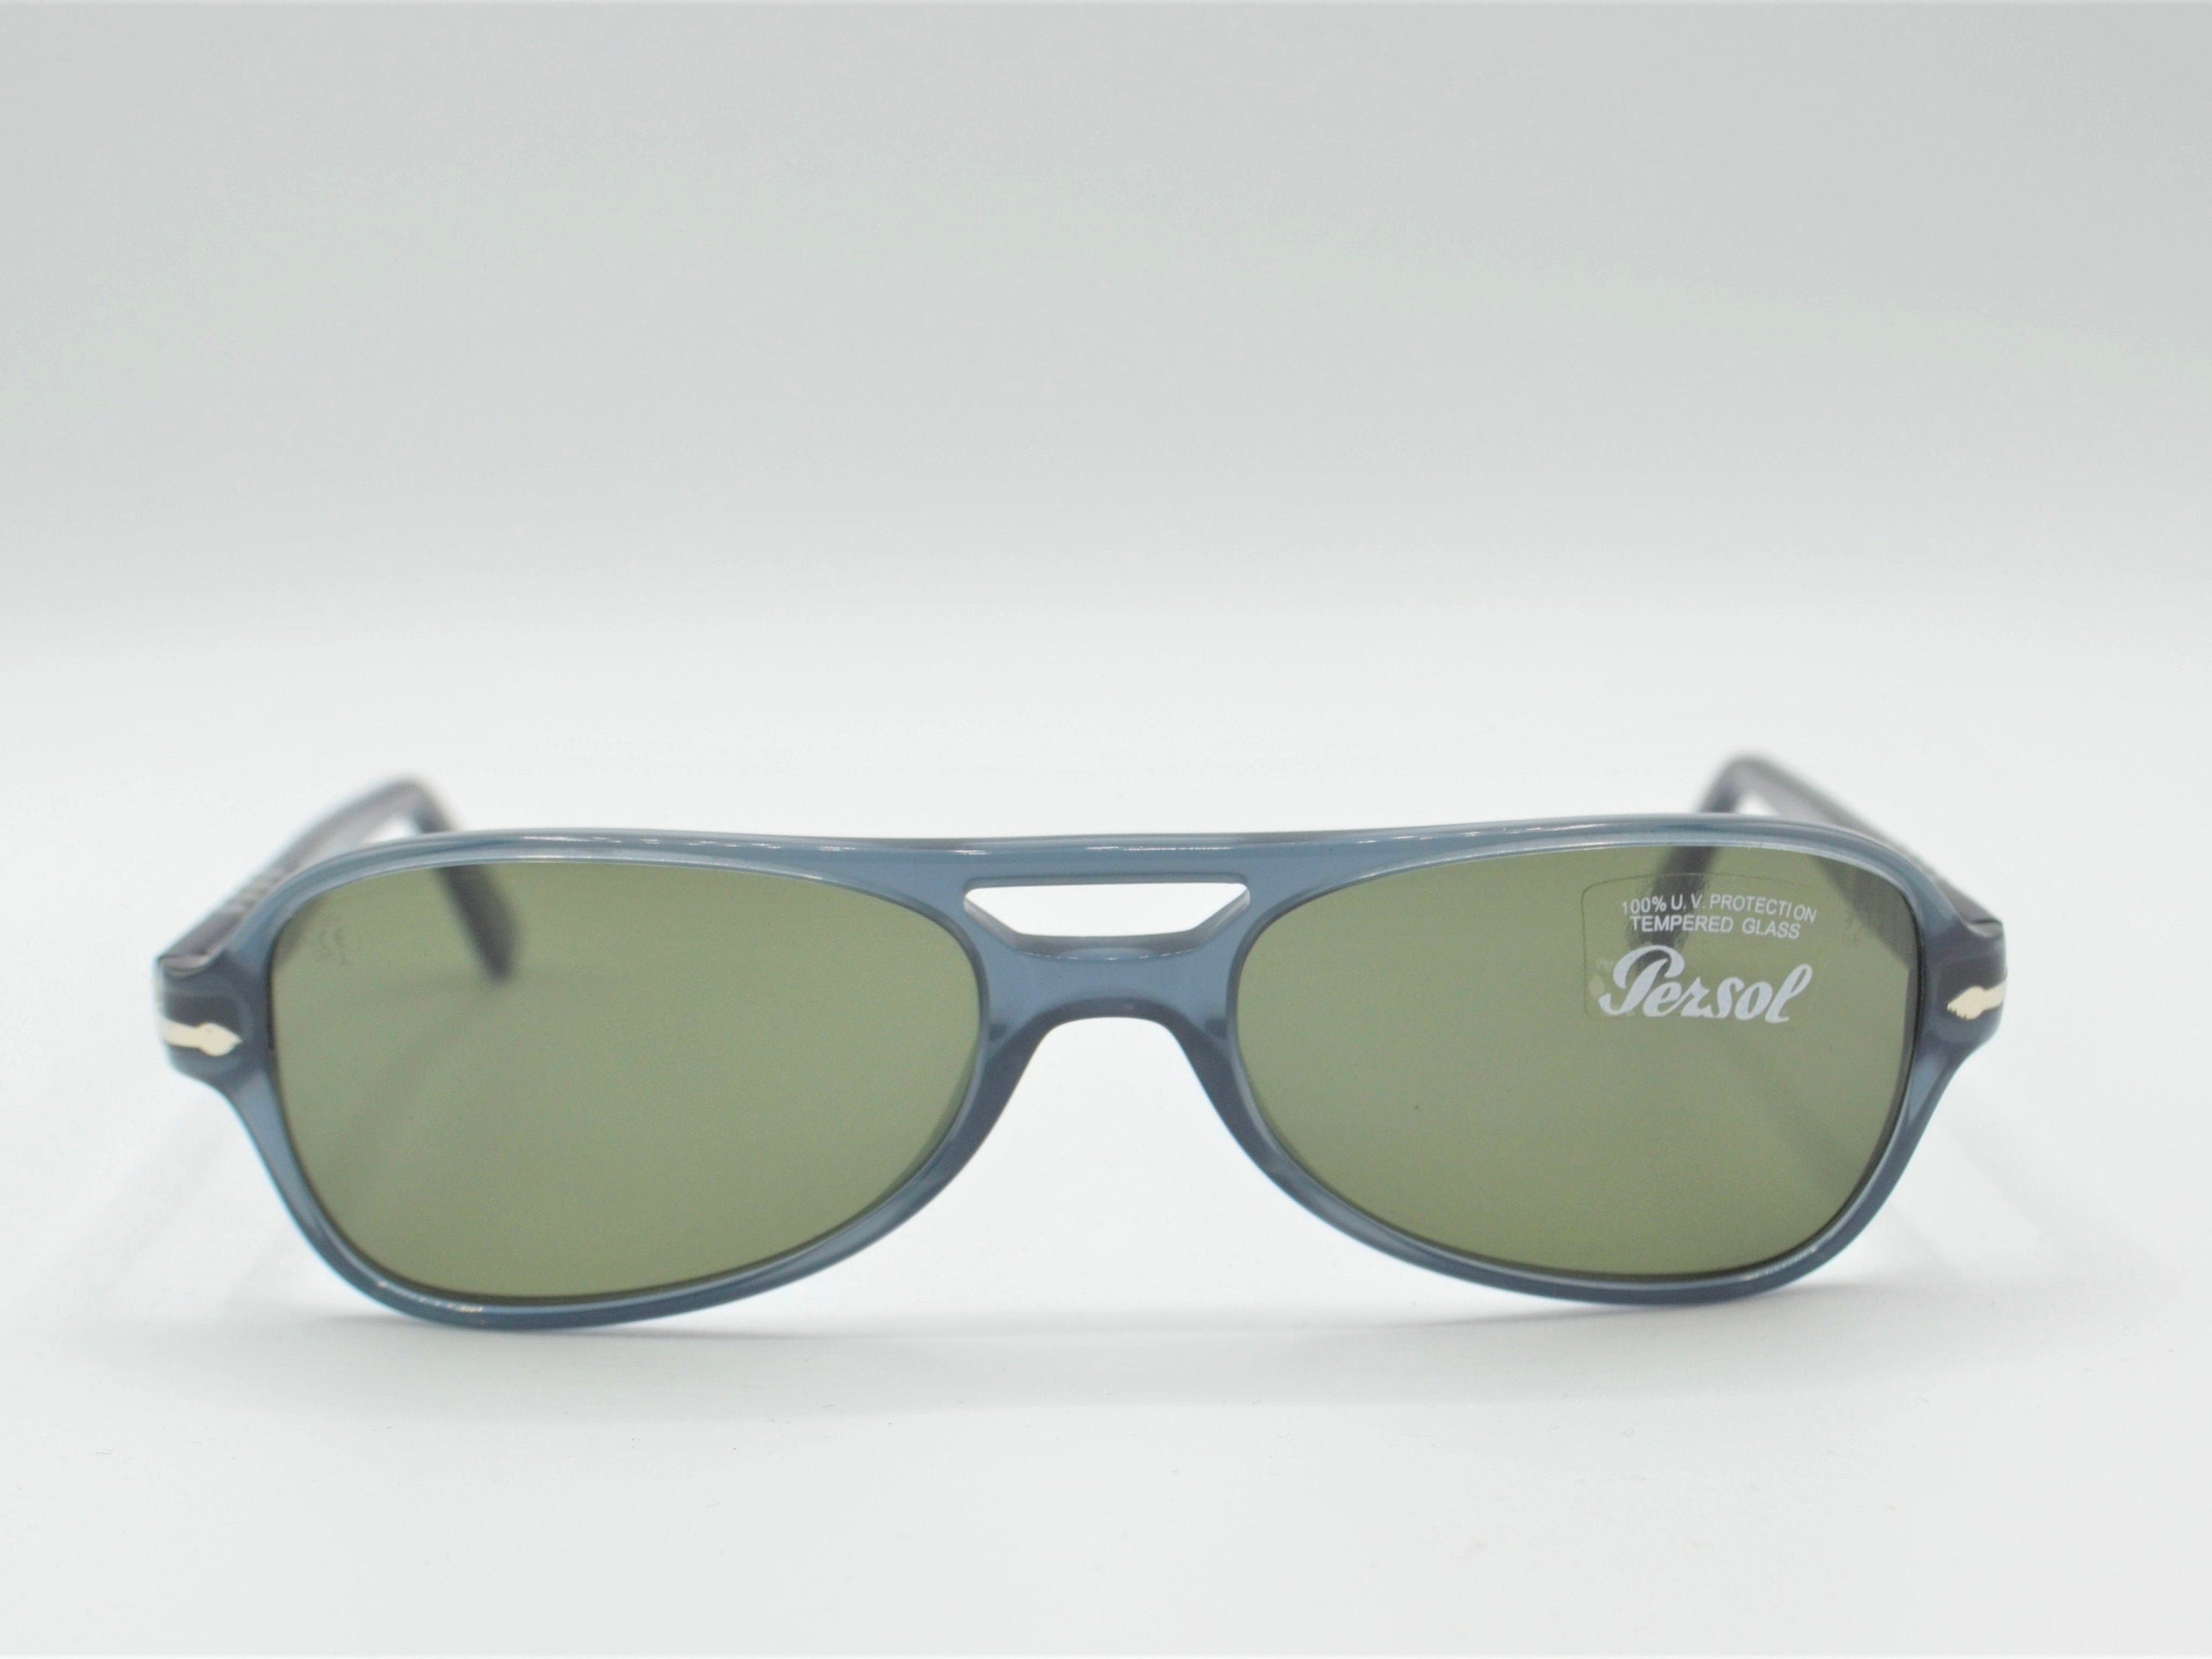 Share more than 200 persol sunglasses philippines latest